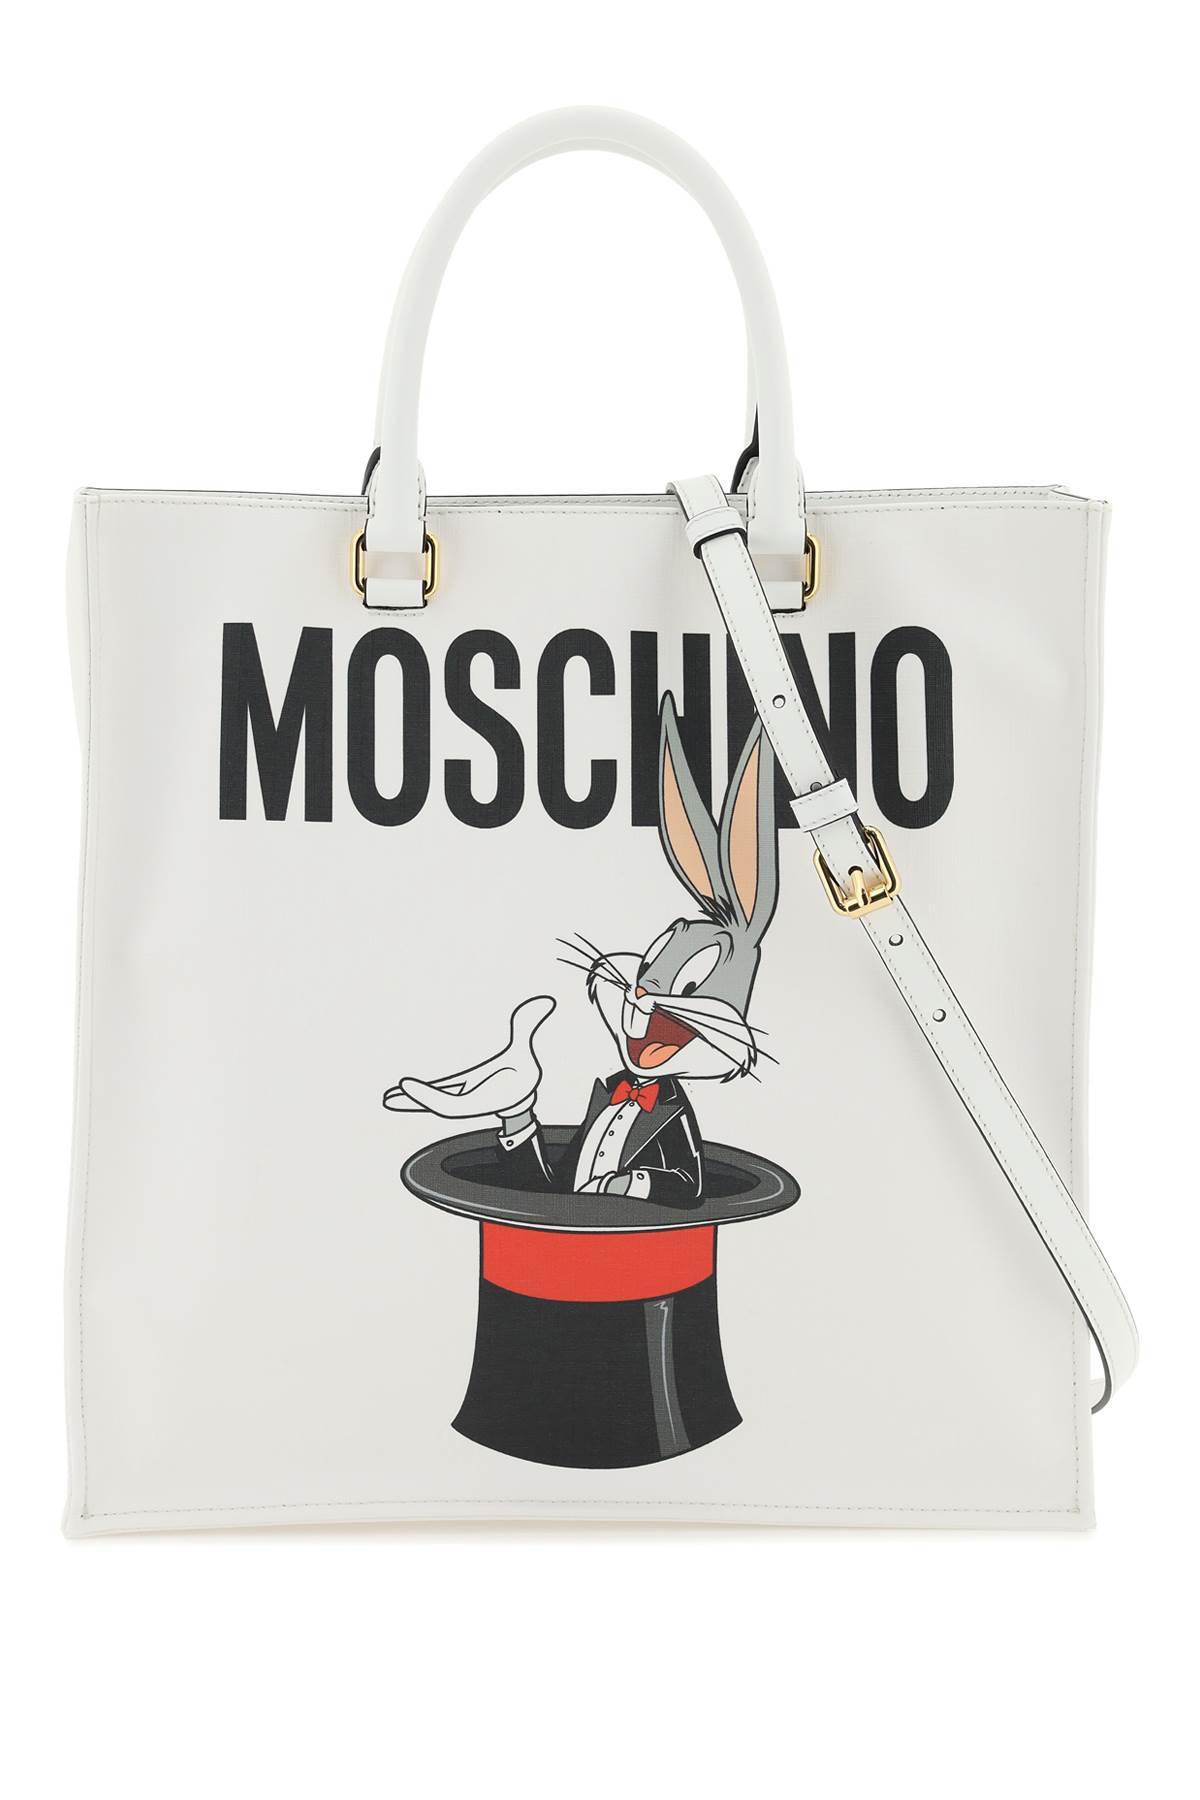 Moschino Bugs Bunny Tote Bag in White | Lyst Australia